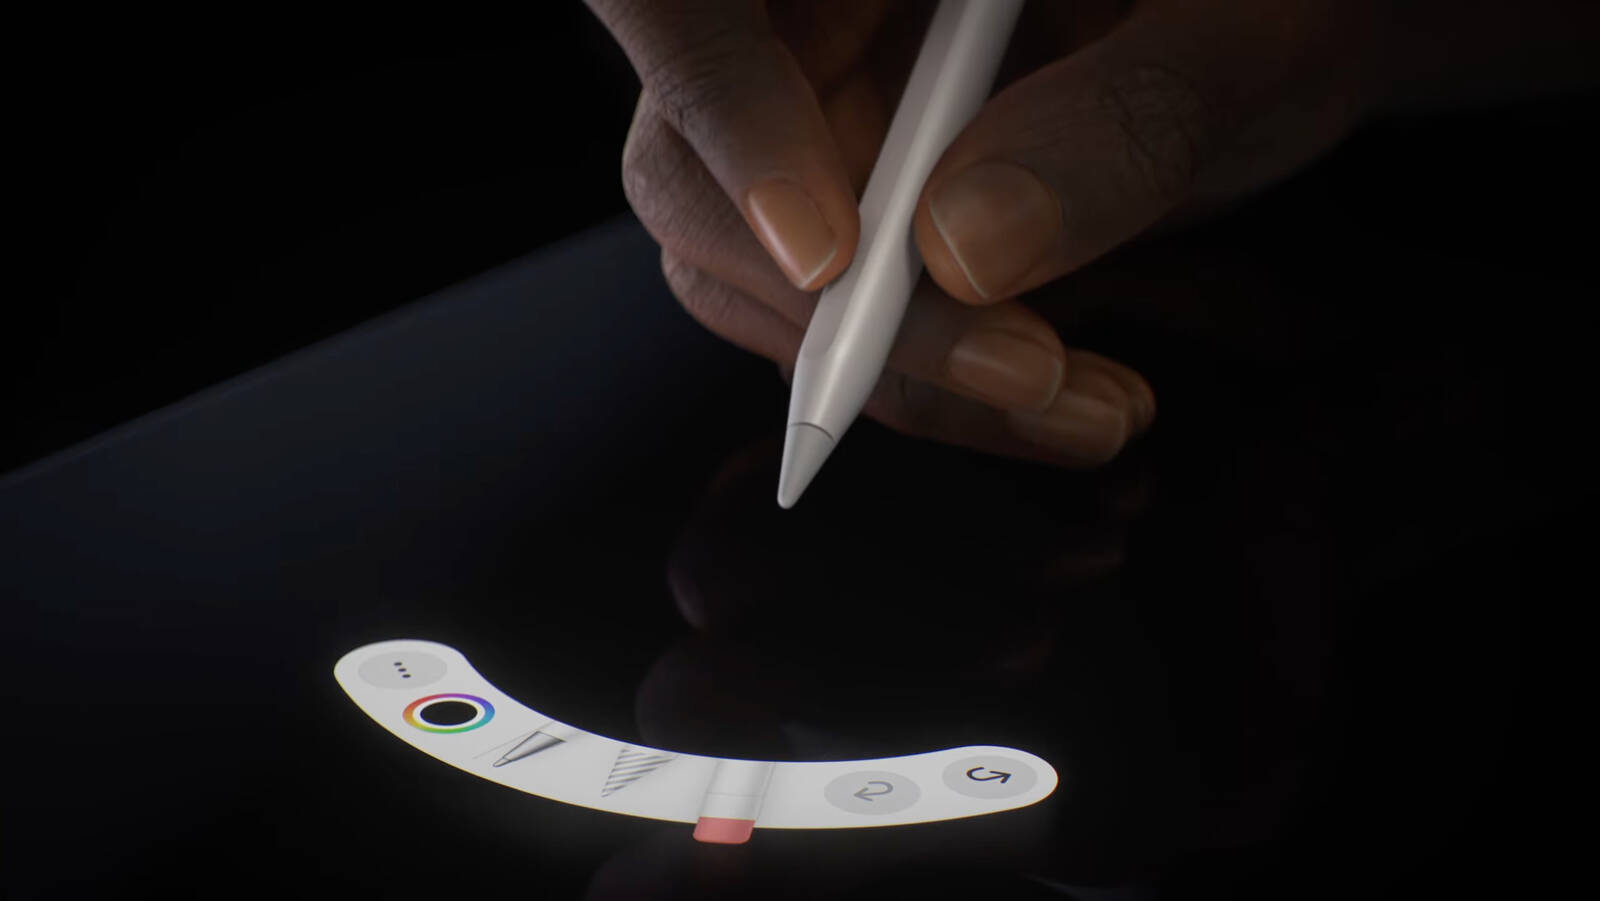 Here's the Apple Pencil Lineup With New Pro Model